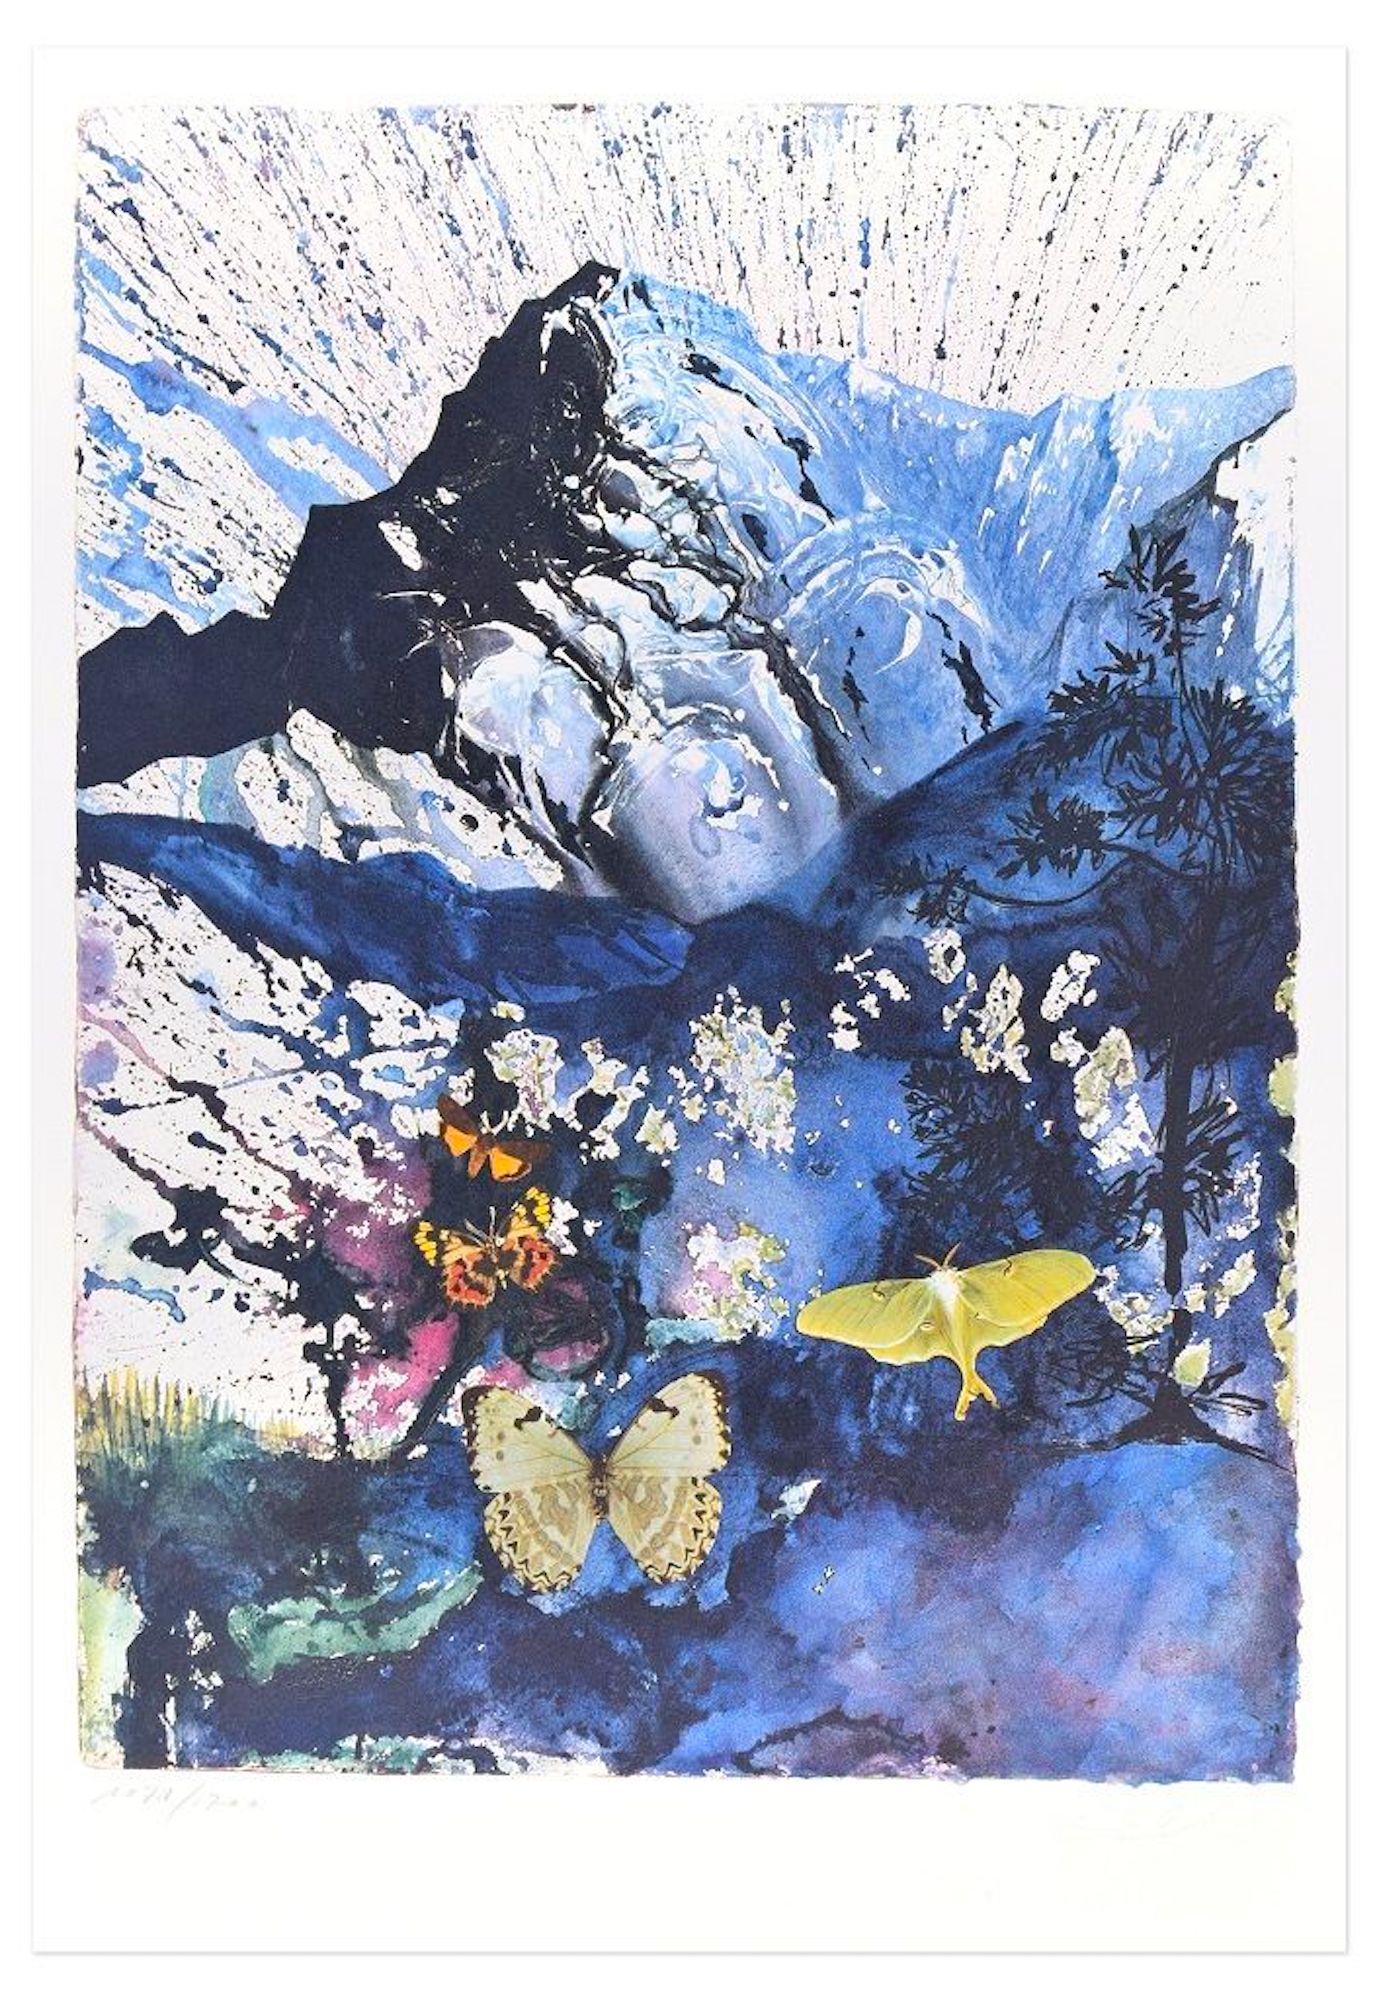 Salvador Dalí Print - Plate IV - From "Suite Papillon" - Original Lithograph and Heliogravure - 1969